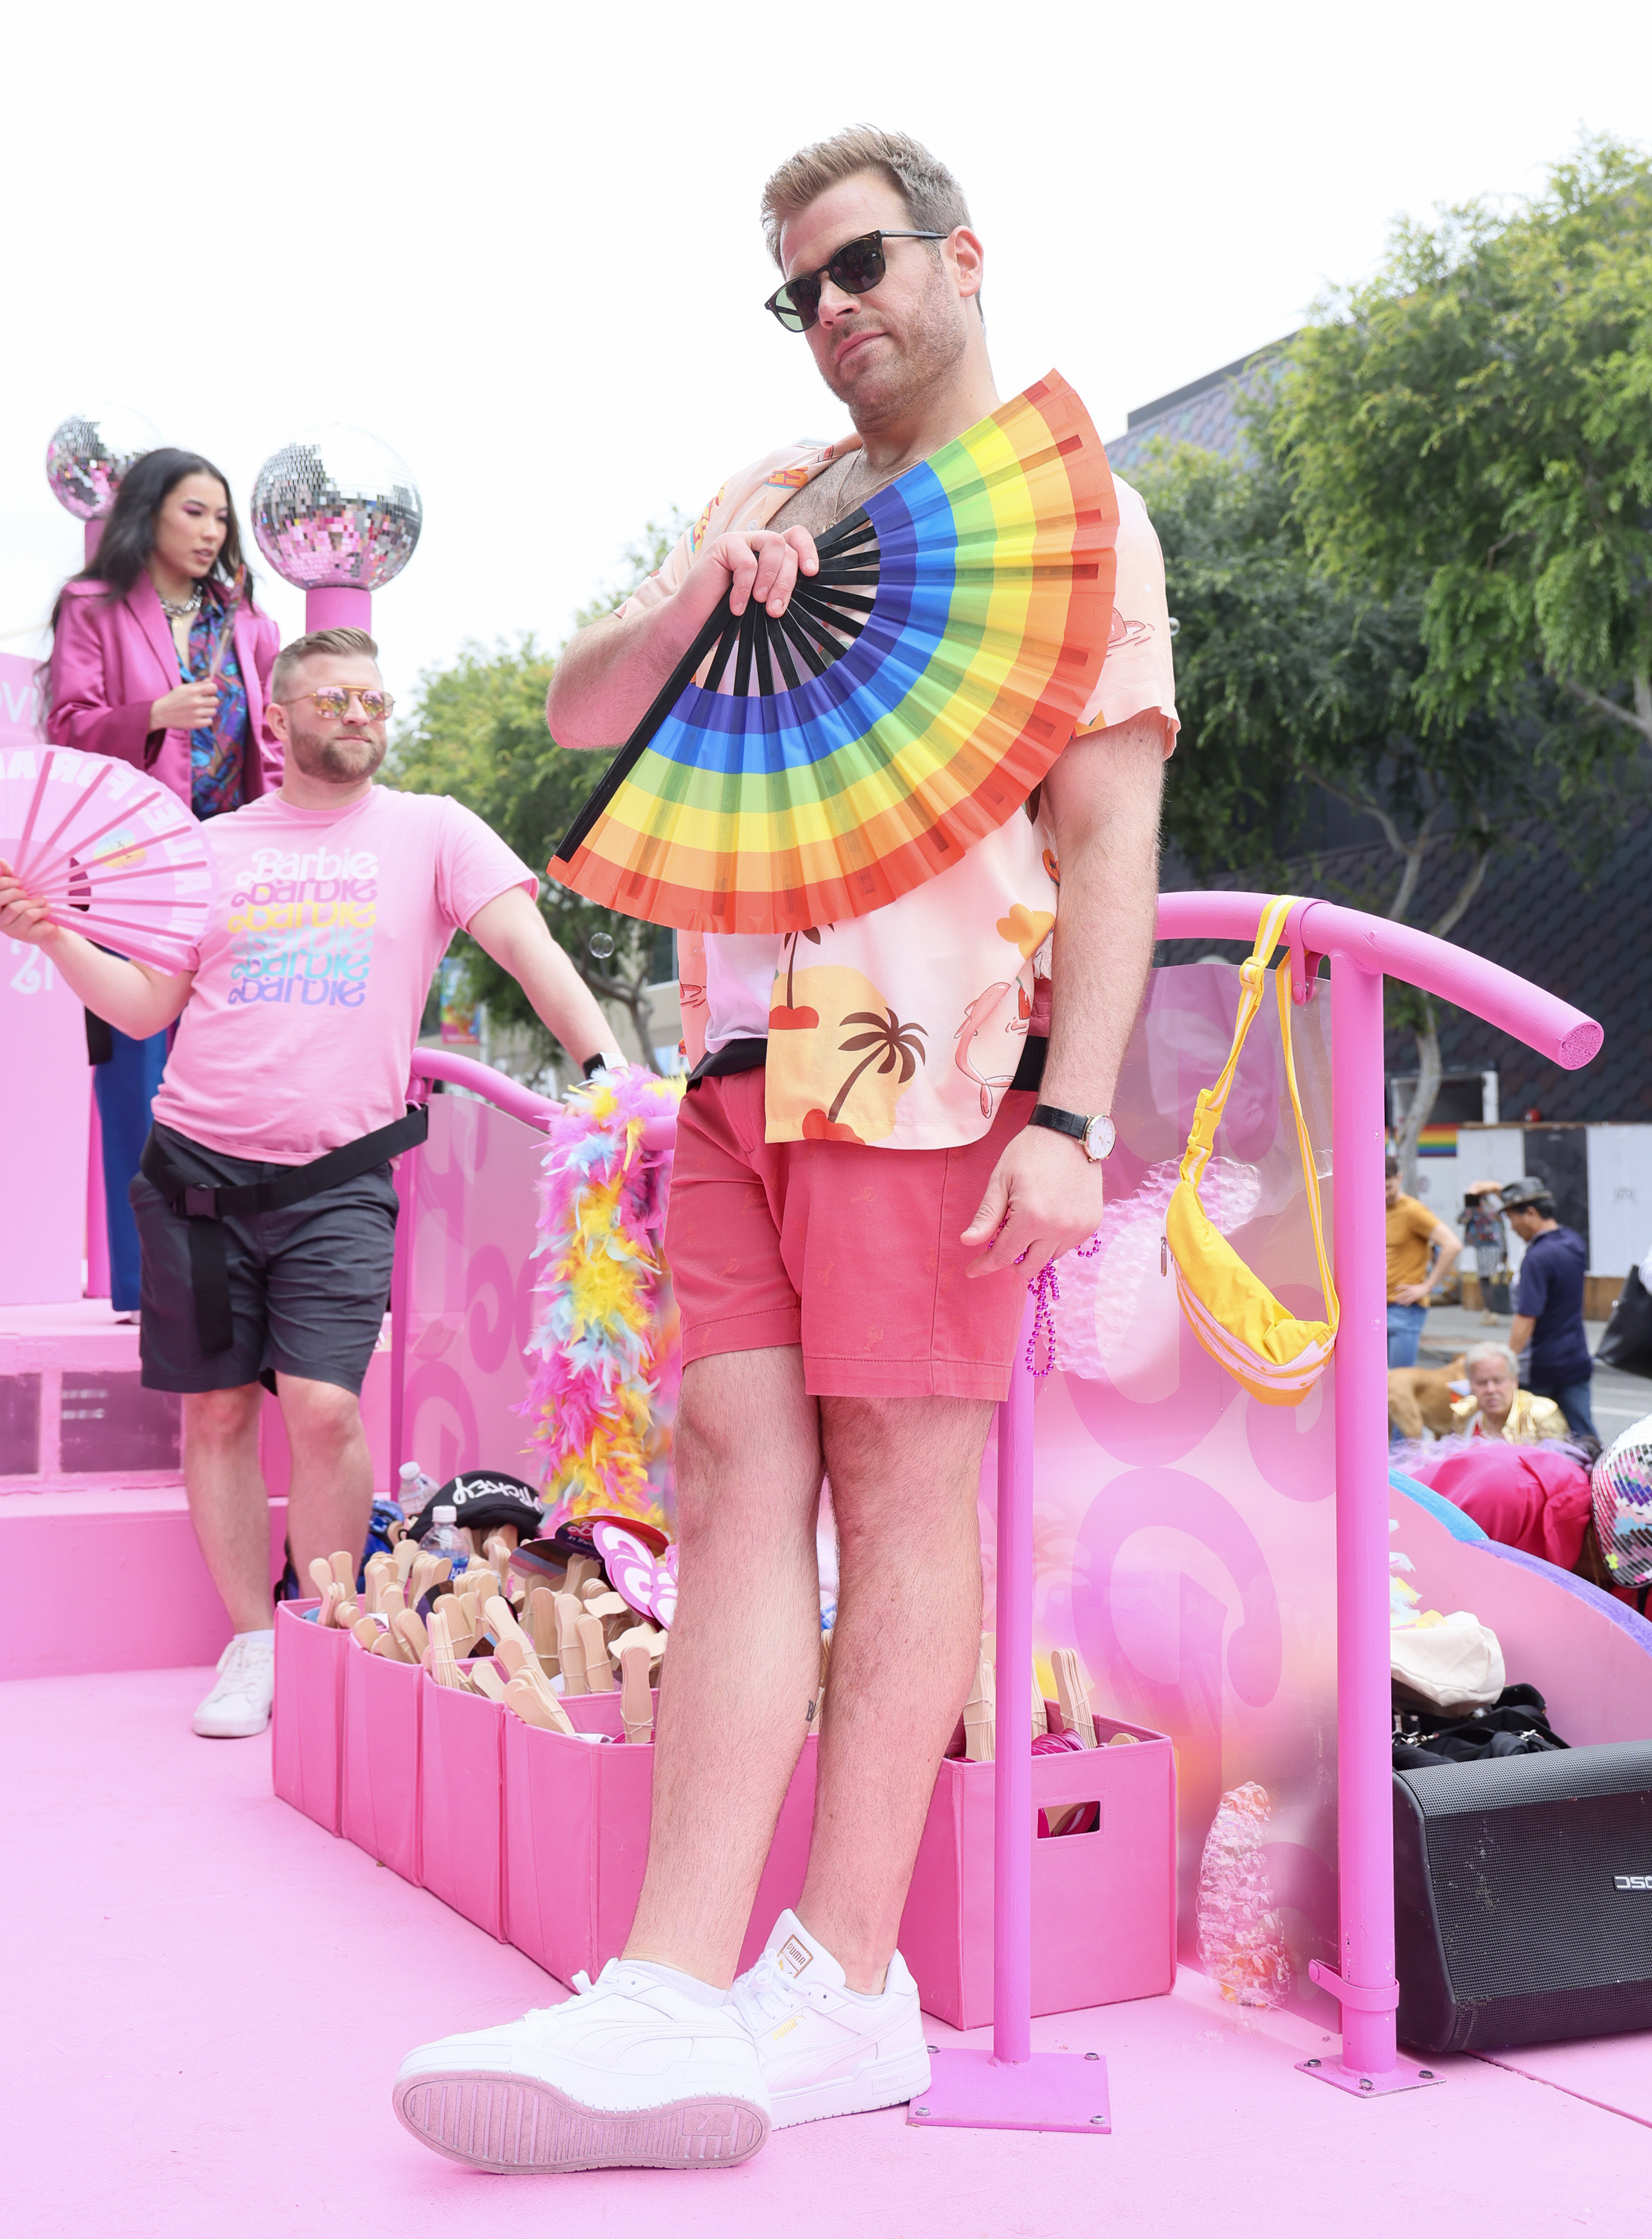 Scott Evans posing with a rainbow fan on the pride float